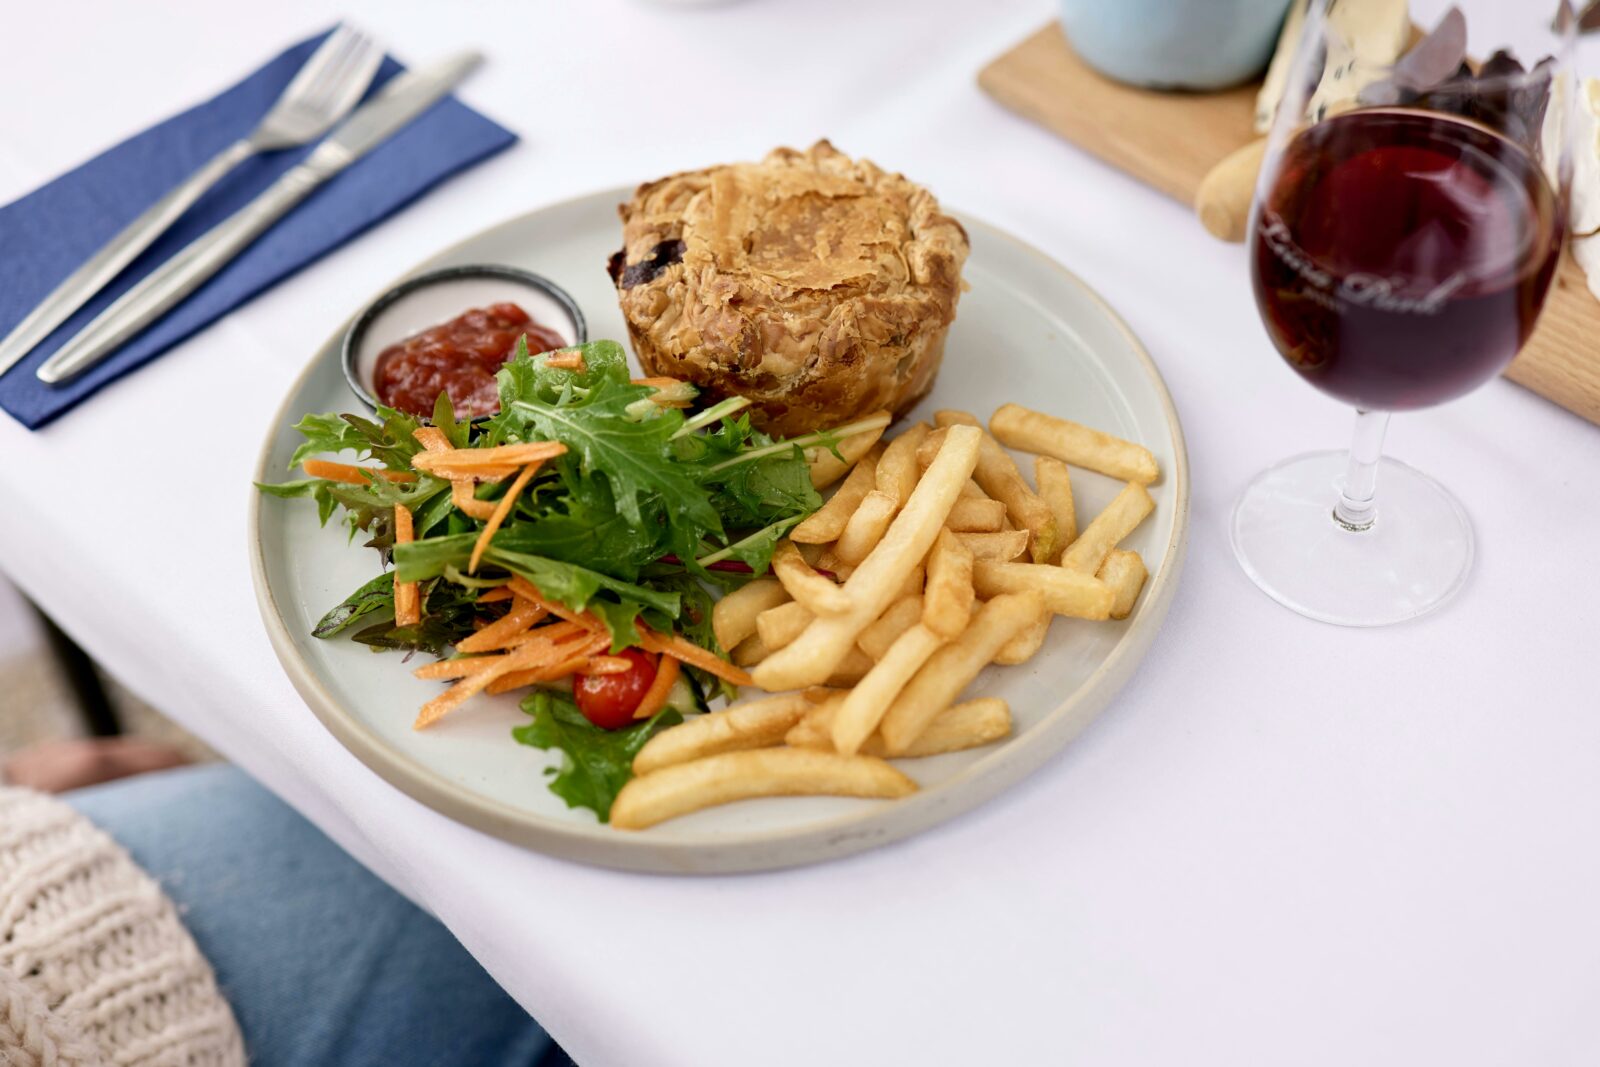 White tablecloth, a plate with a pie, chips and salad, and a glass of red wine